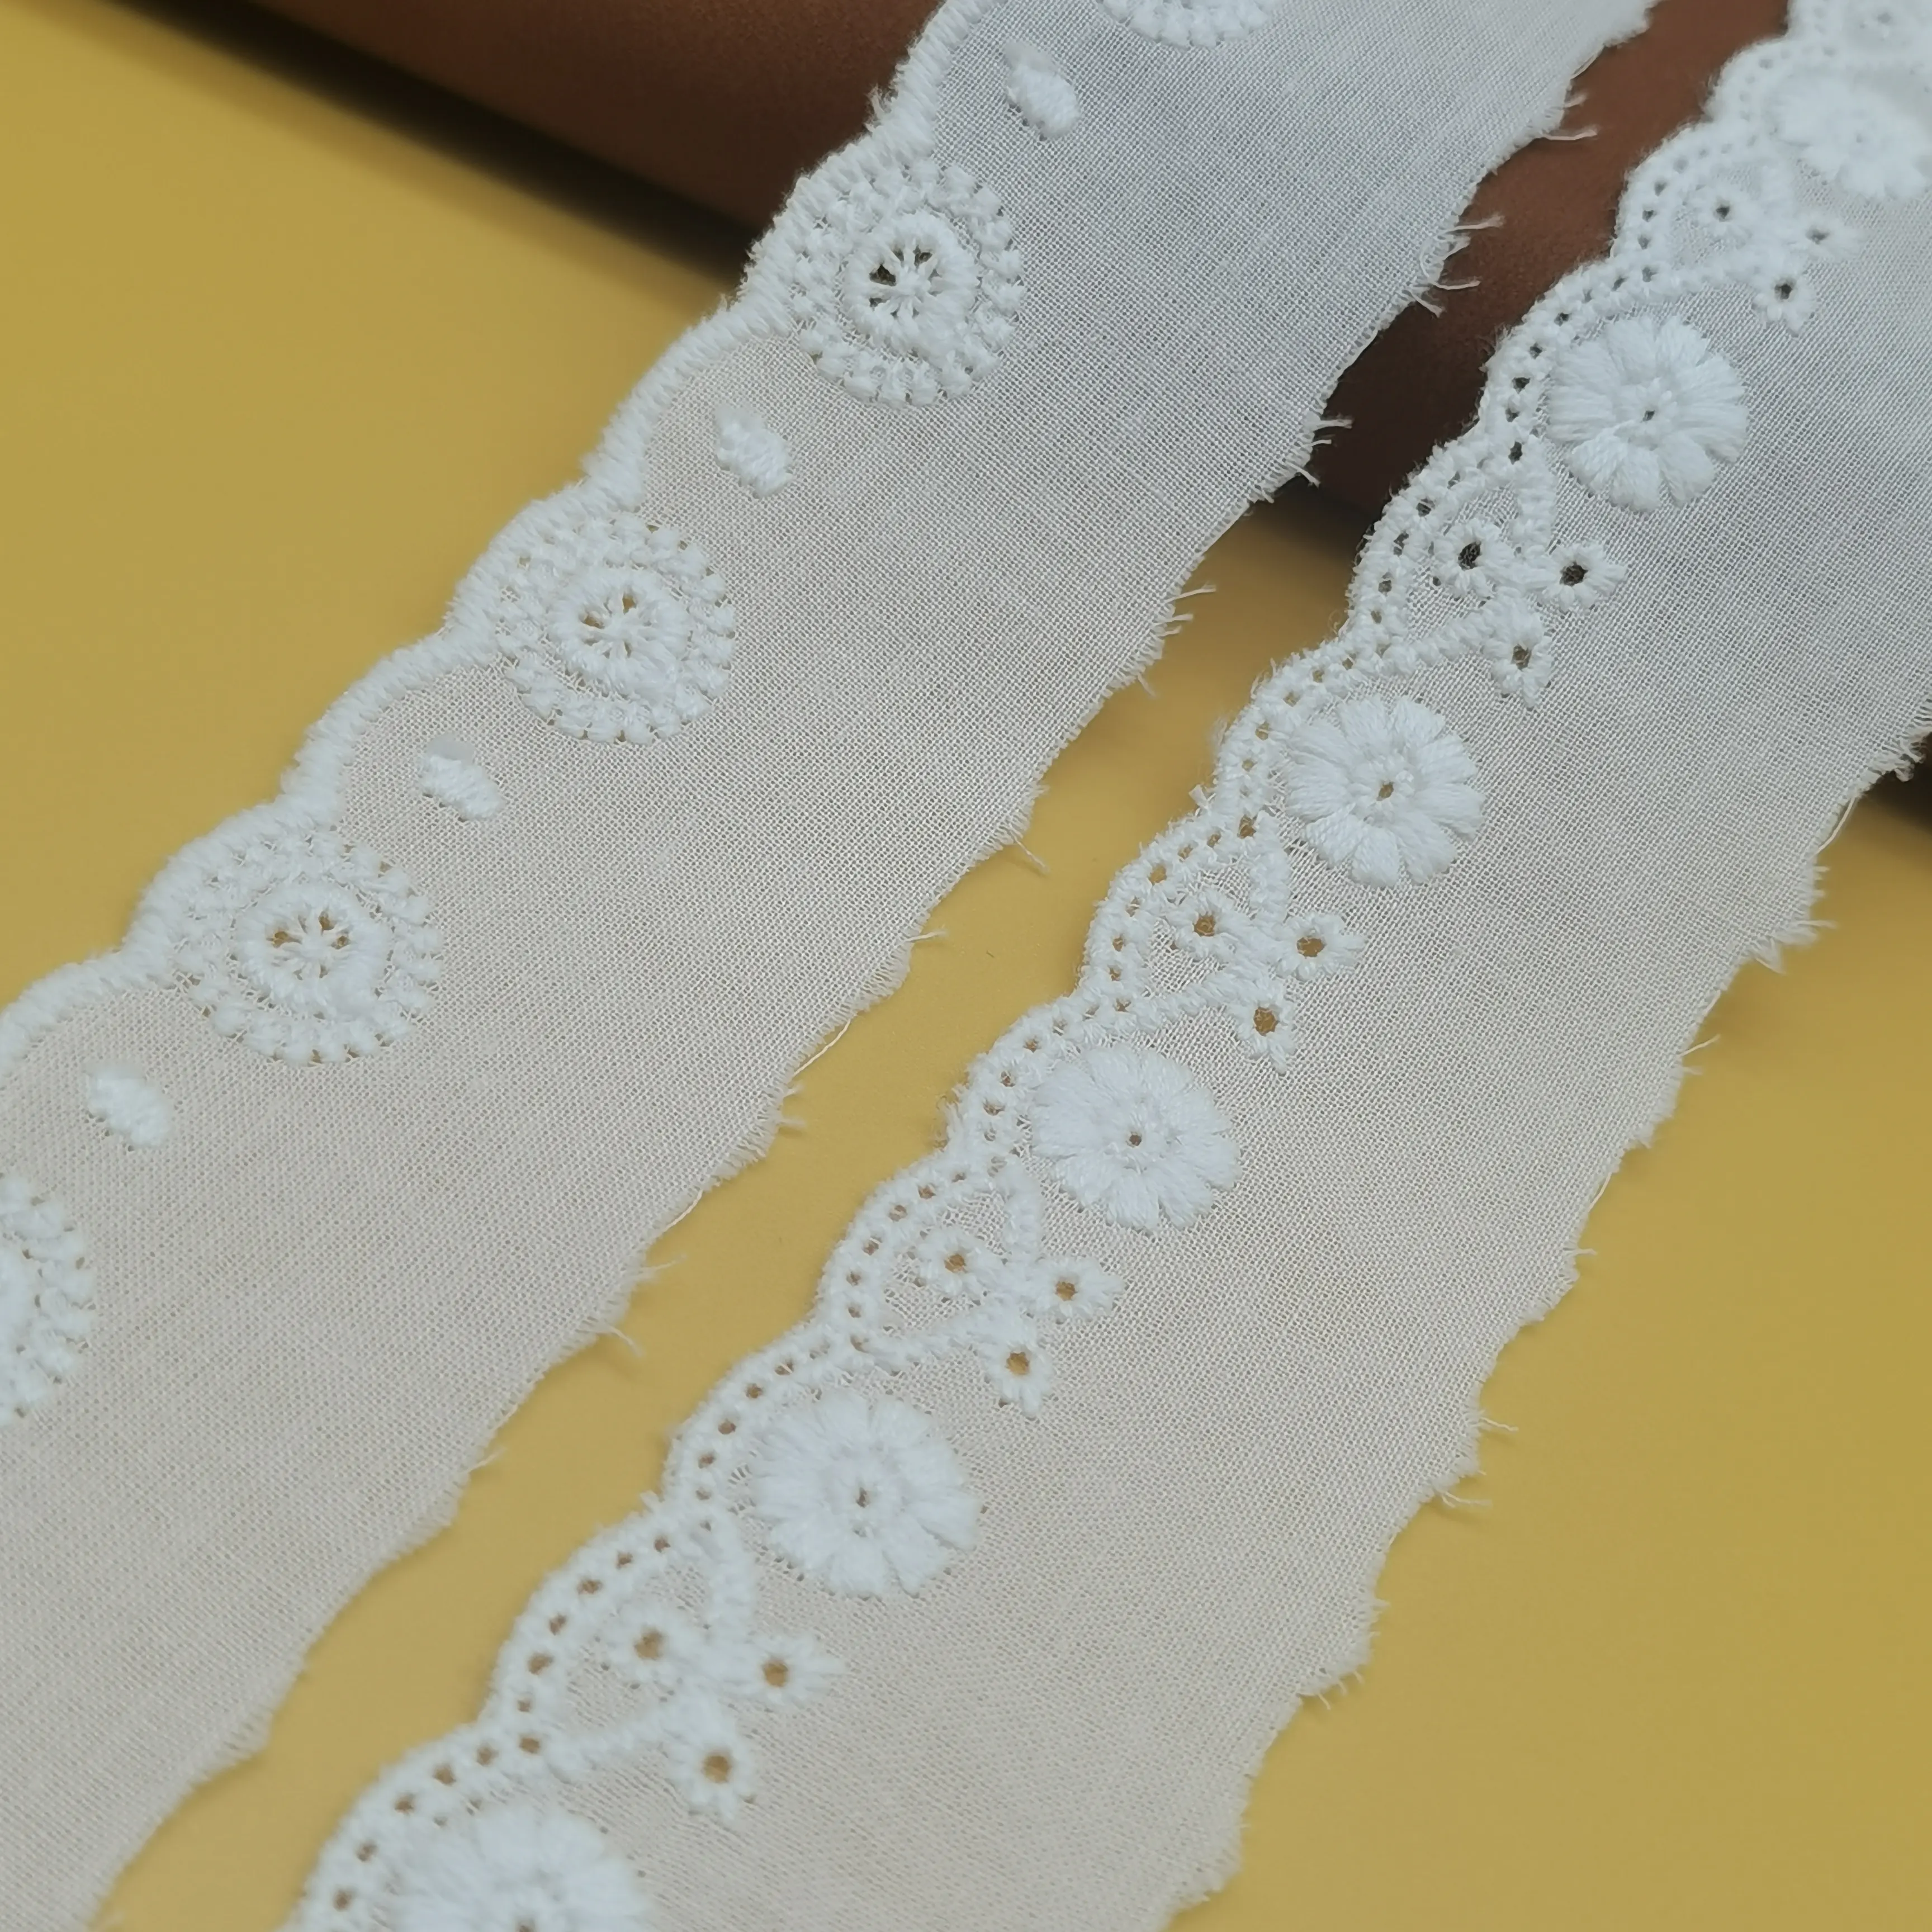 OEM Wholesale Custom 100% Cotton 3D Lace Fabric 3cm Embroidery Lace Border Trim White Eyelet Lace French Tulle for Weddings